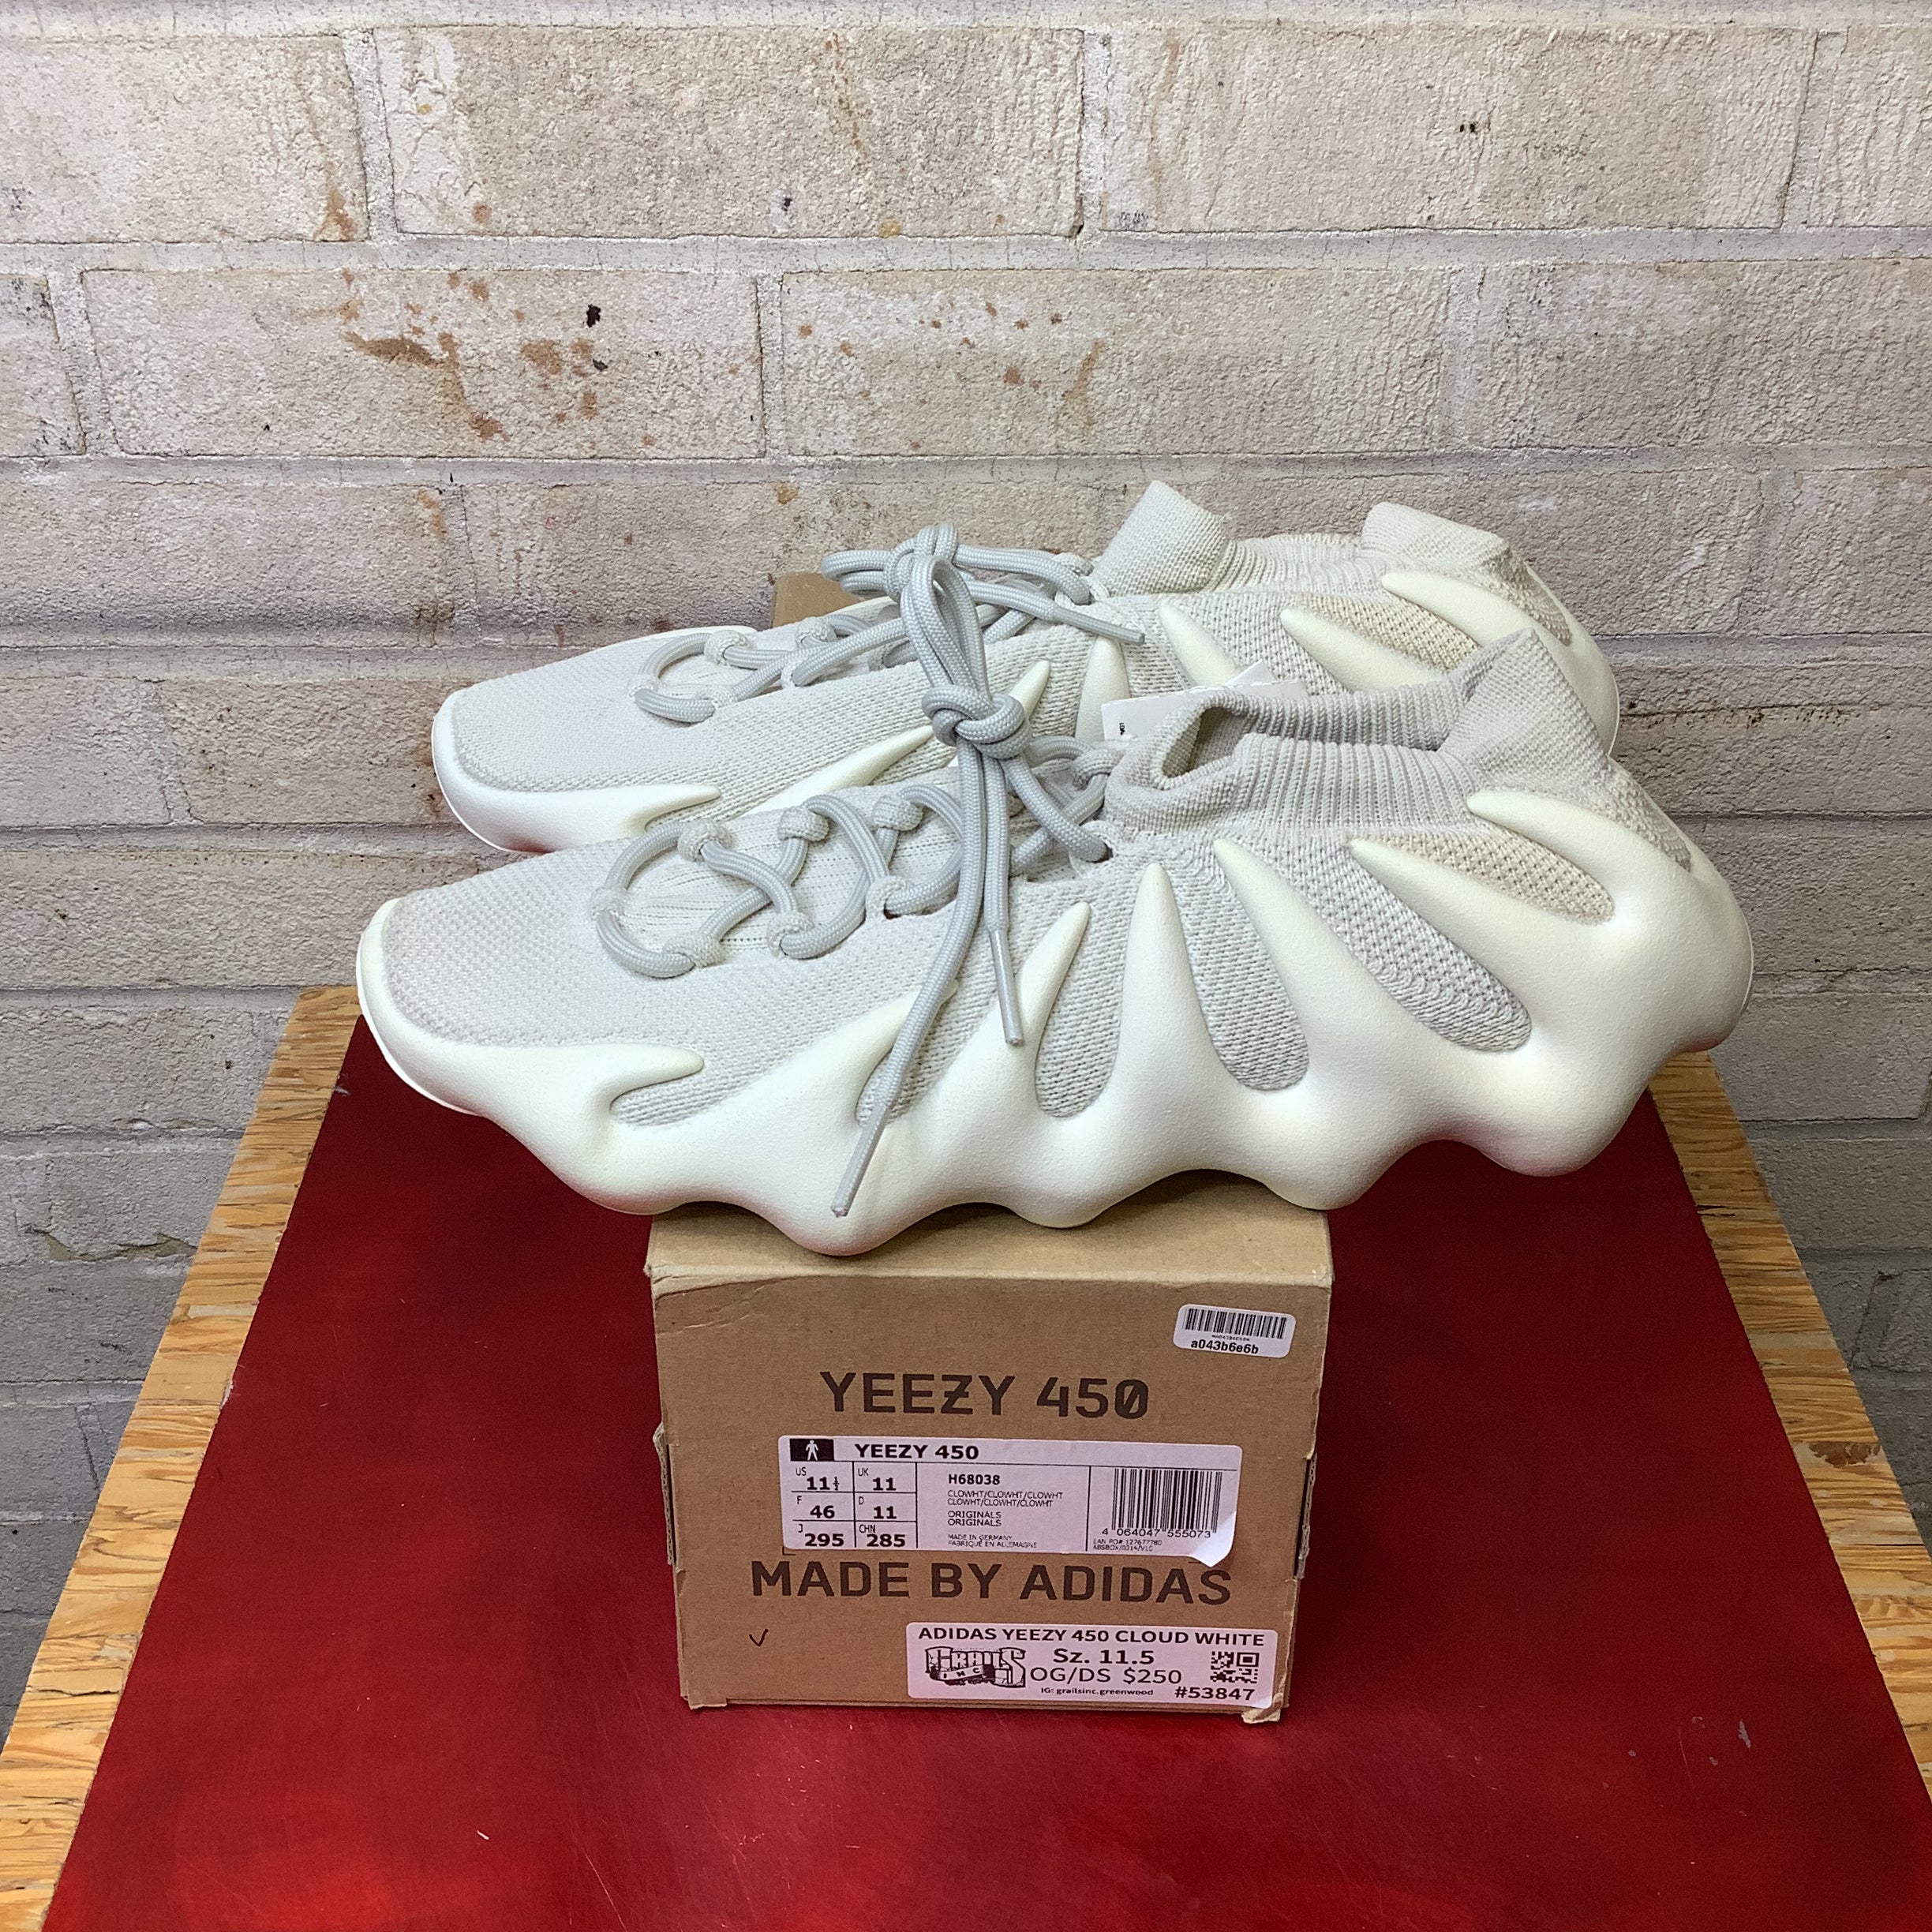 ADIDAS YEEZY 450 CLOUD WHITE SIZE 11.5 H68038